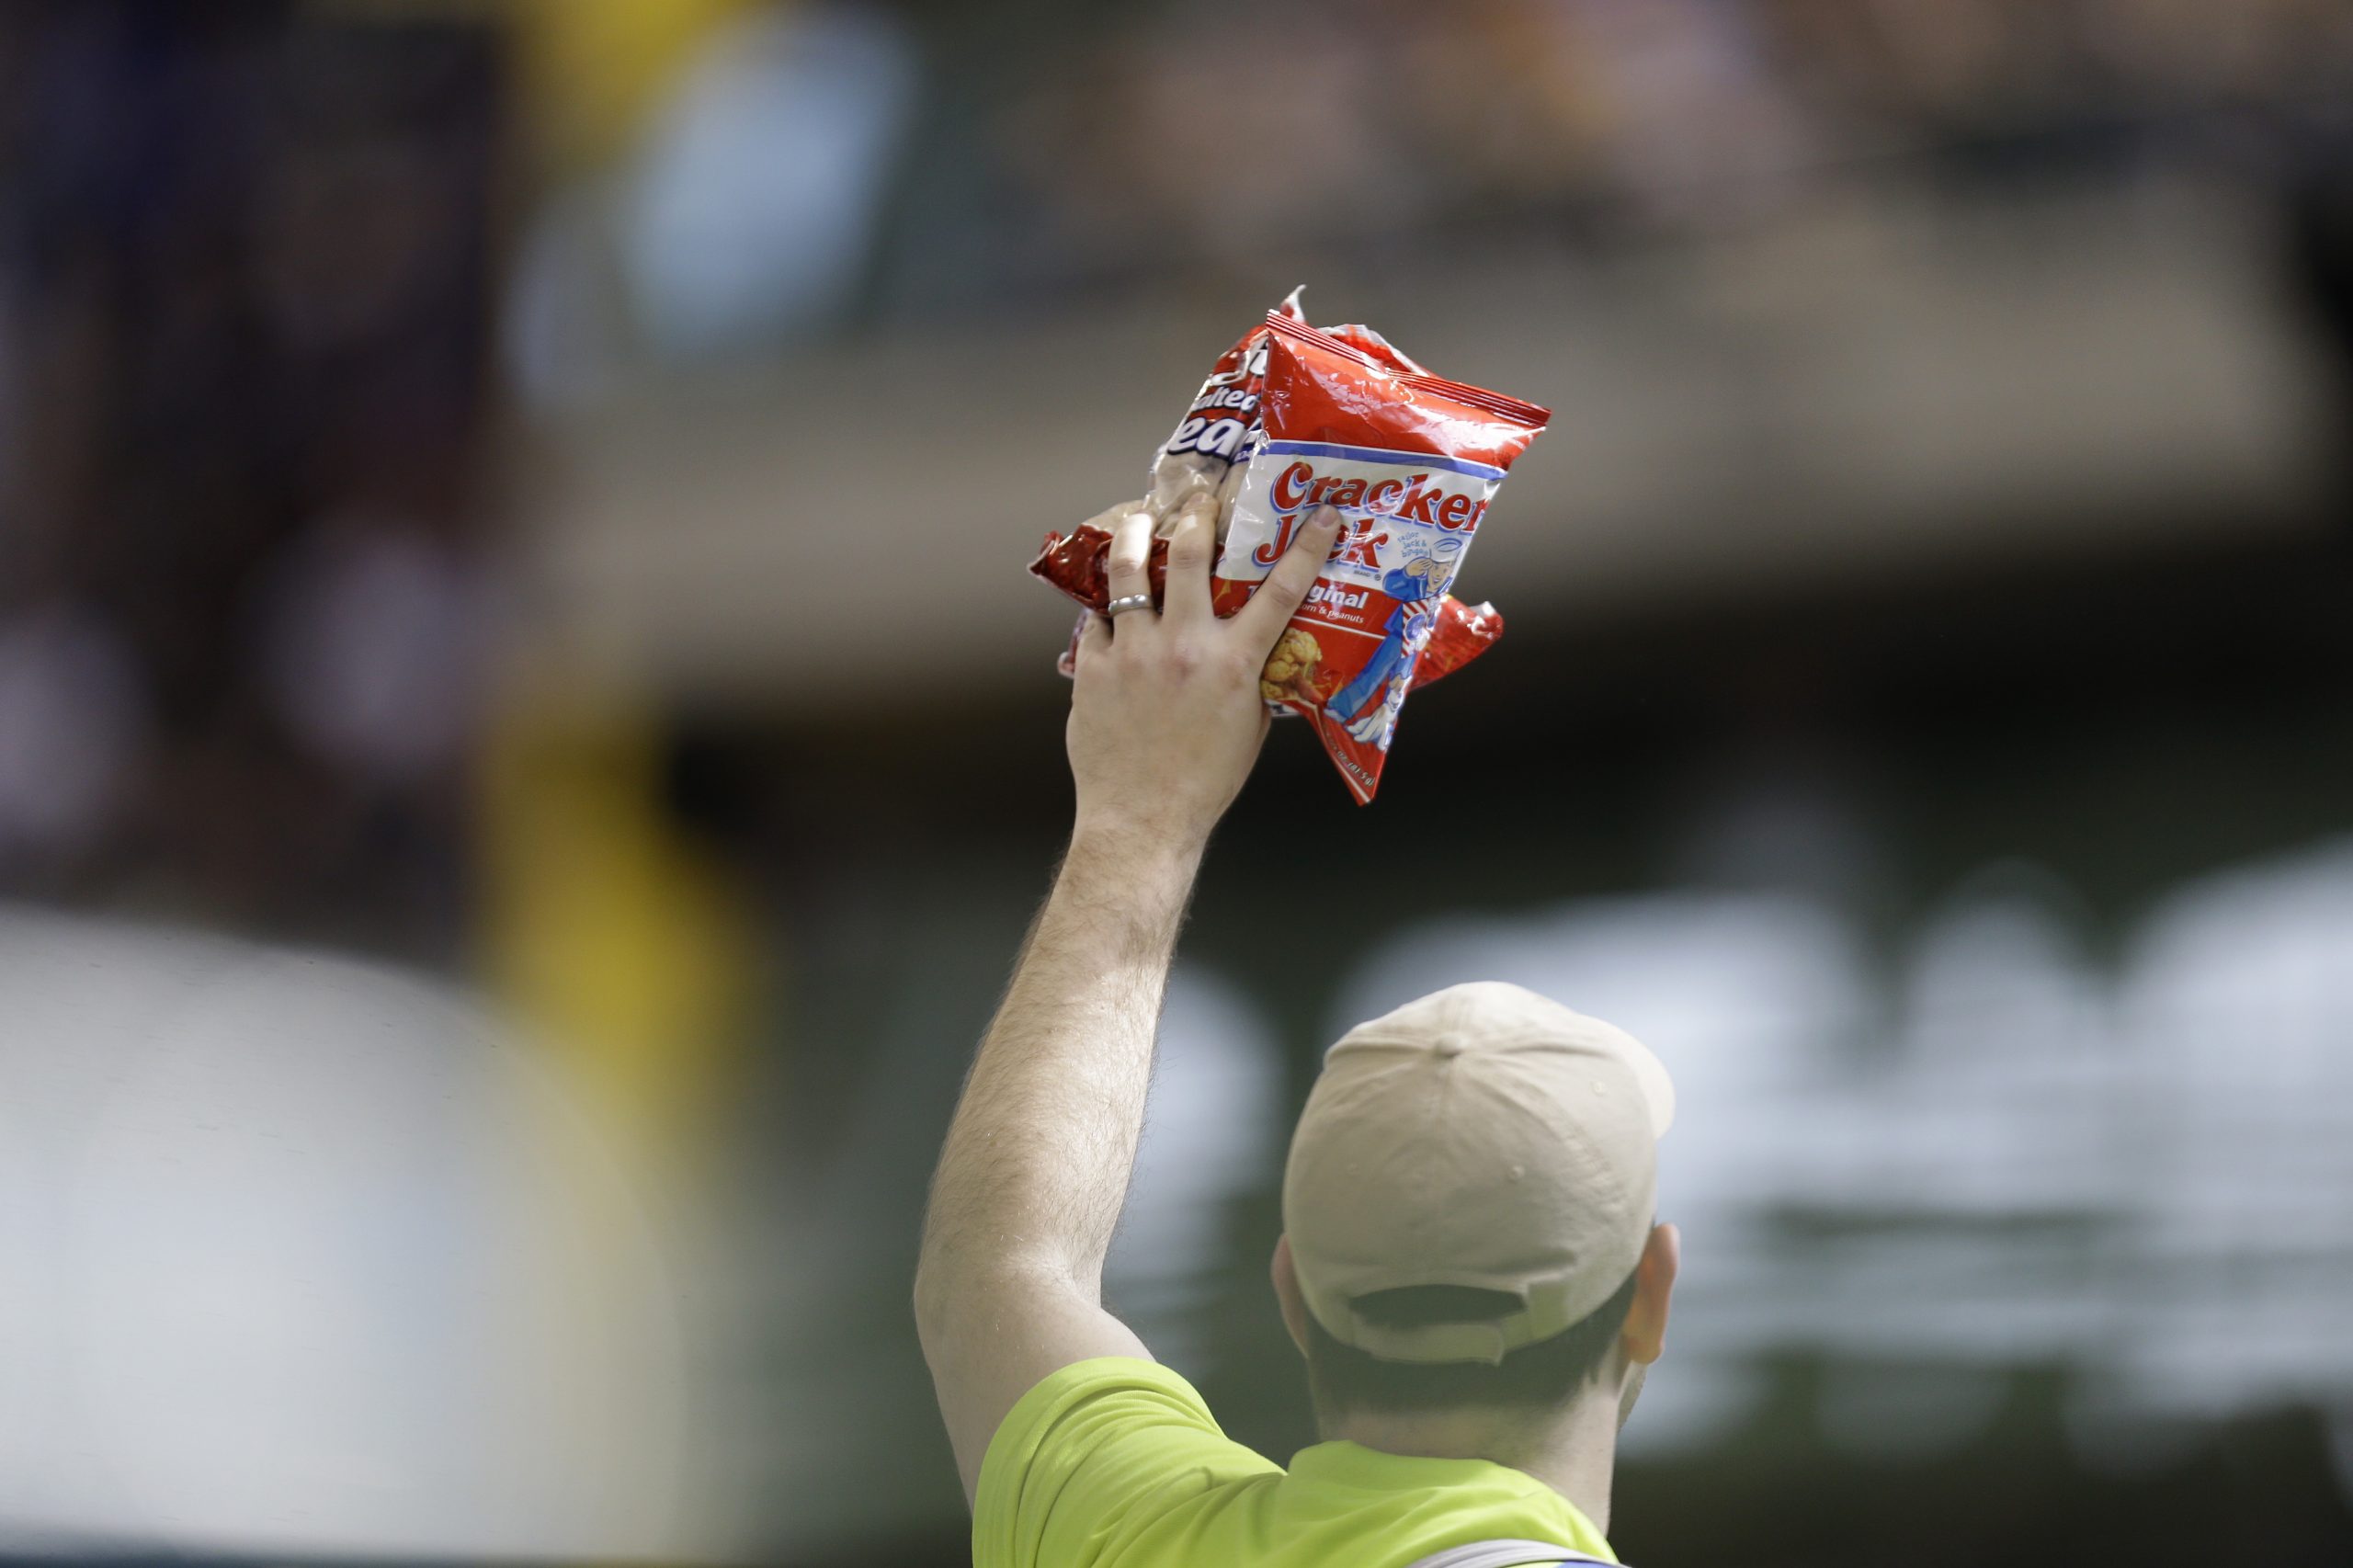 This baseball team wants to Take Out to the Ball Game ‘After Peanut-Free Rewriting